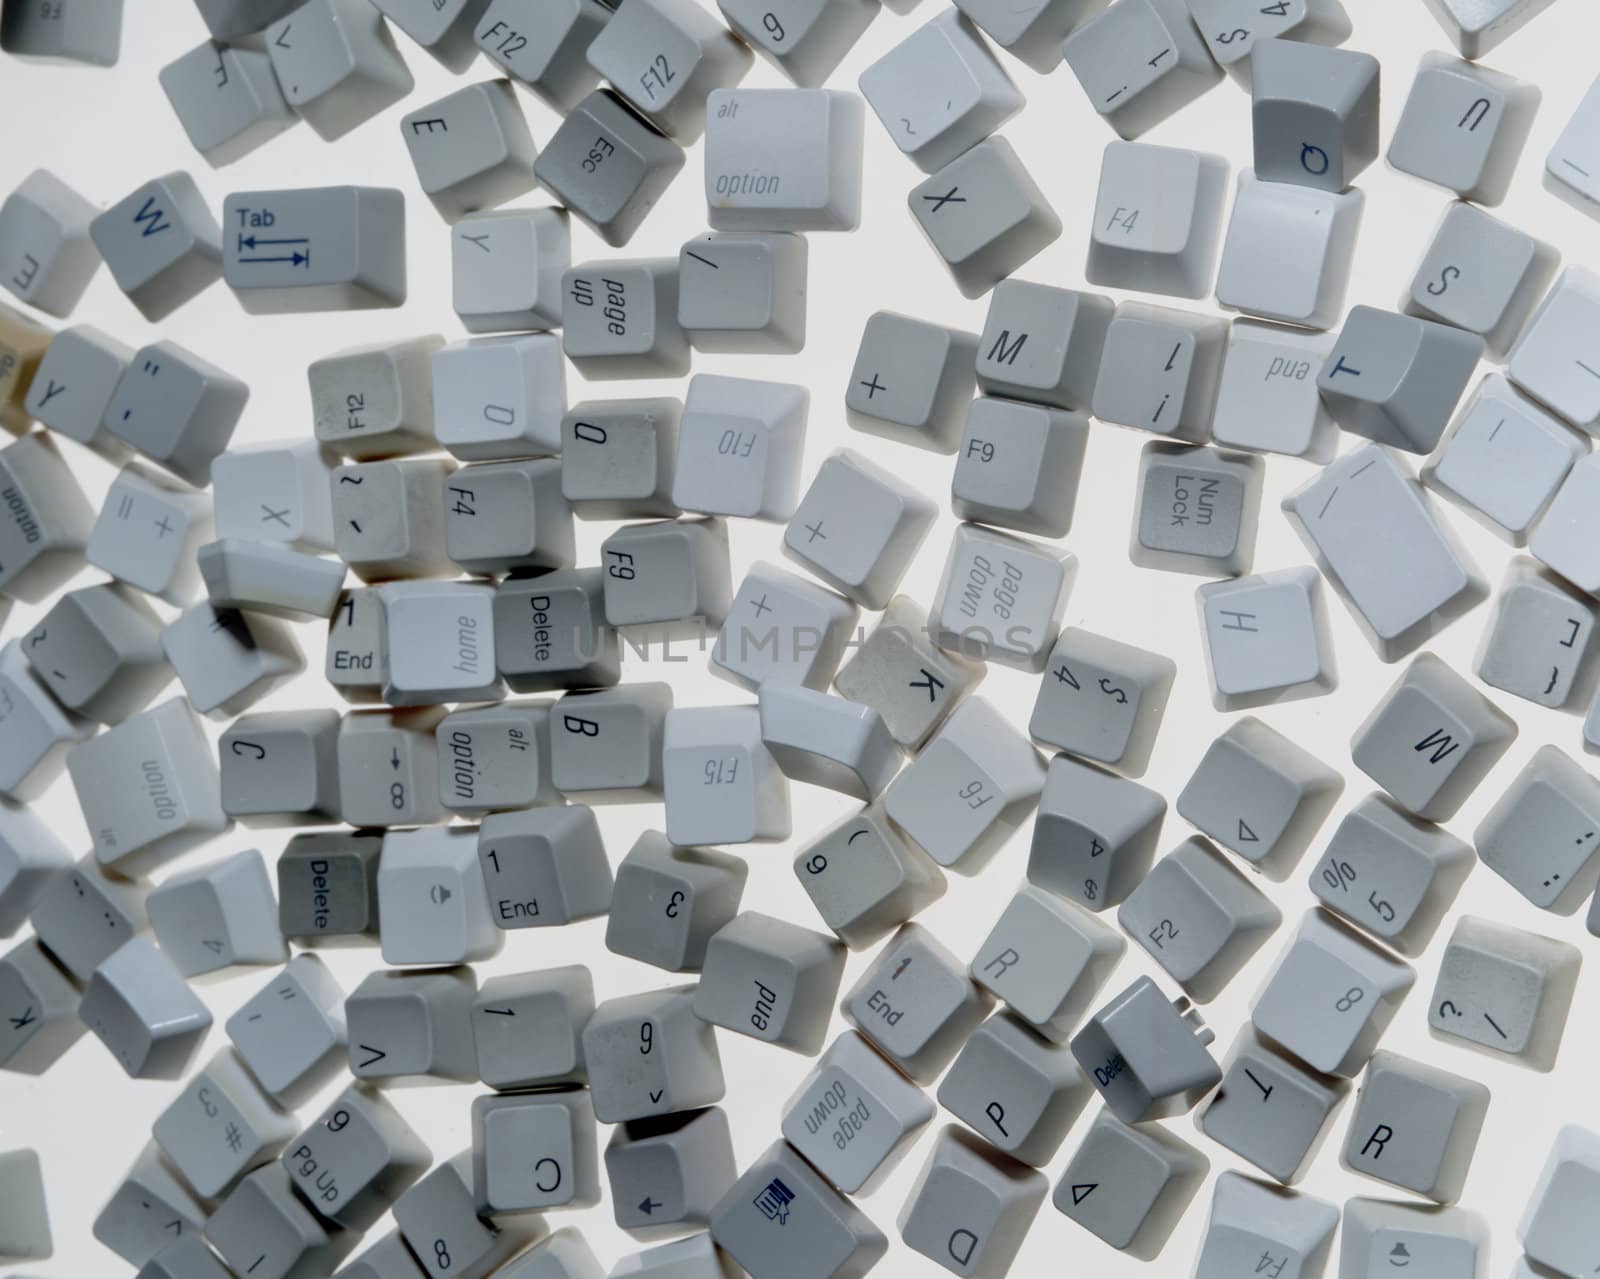 A disassembled keyboard on white
